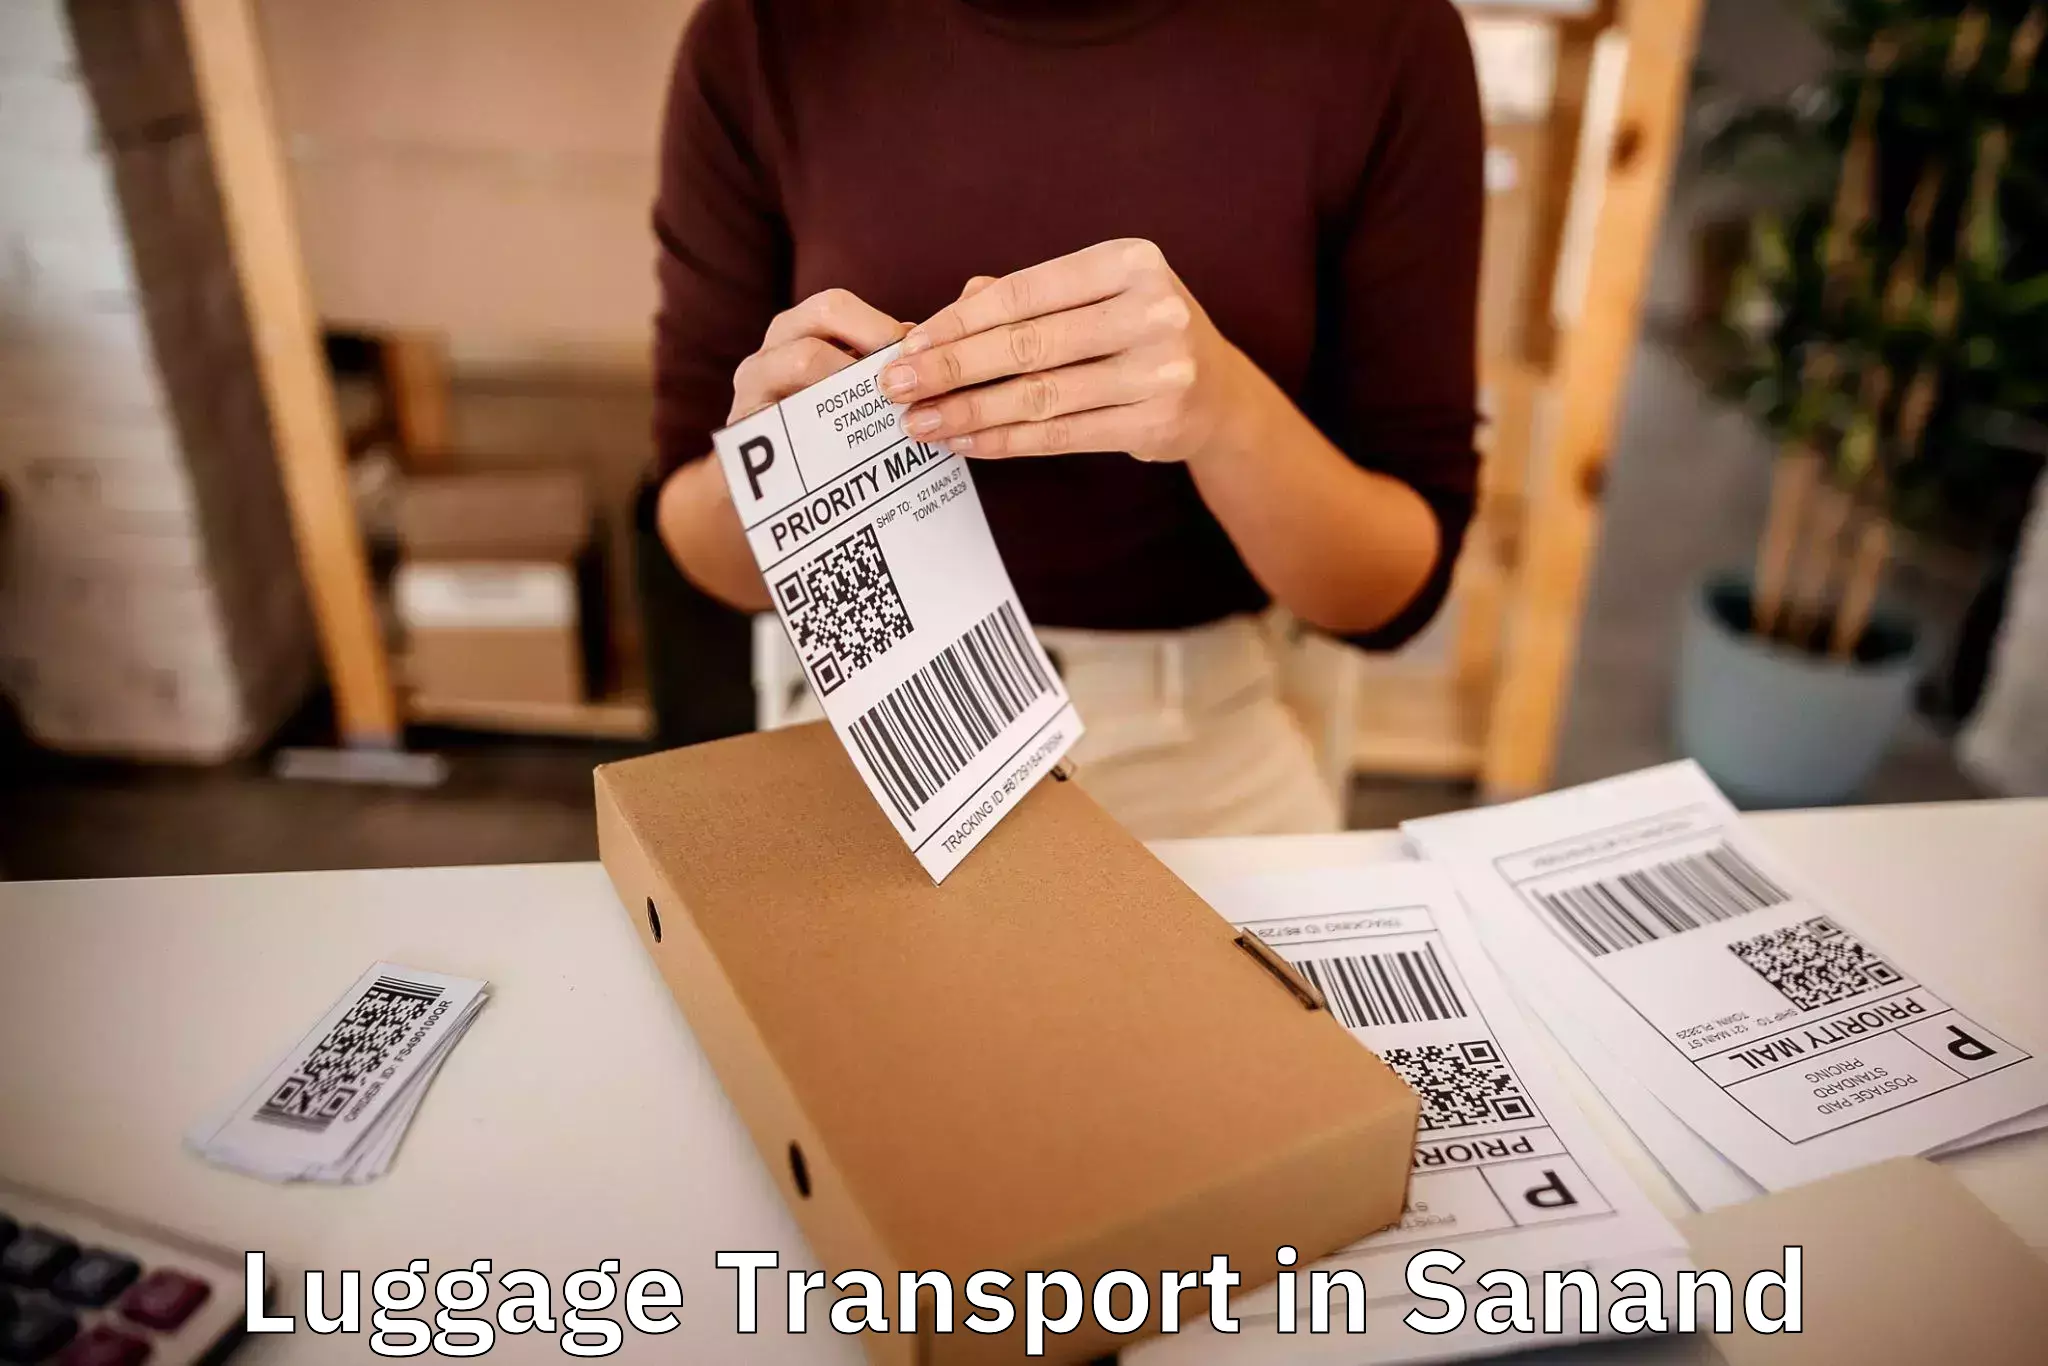 Luggage delivery providers in Sanand